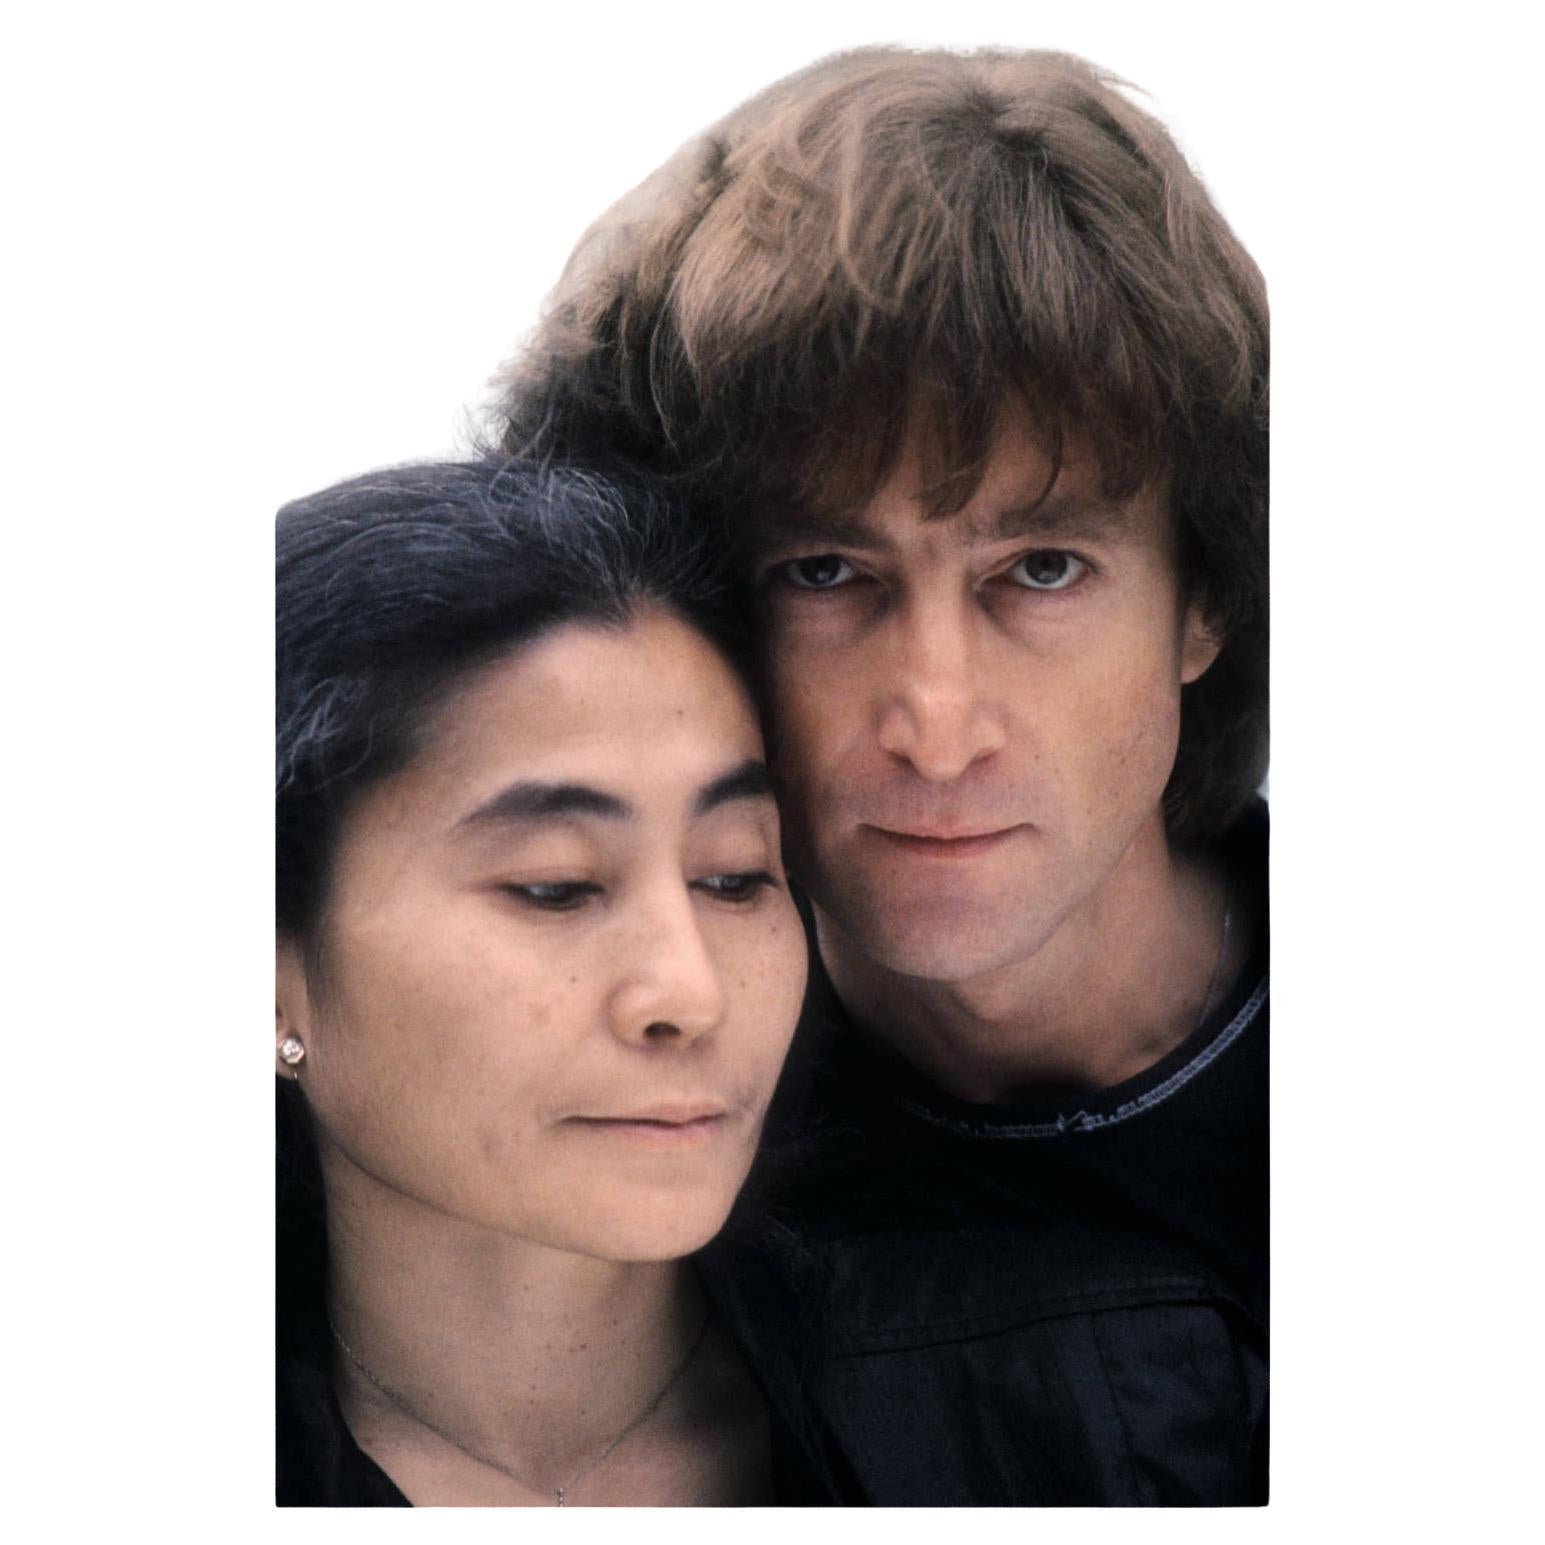 Partners in life and art.
Intimate portraits of John and Yoko.

Renowned for his sensual, provocative images, Kishin Shinoyama is one of Japan’s most controversial and acclaimed artists, at once hailed by critics and charged for public indecency.